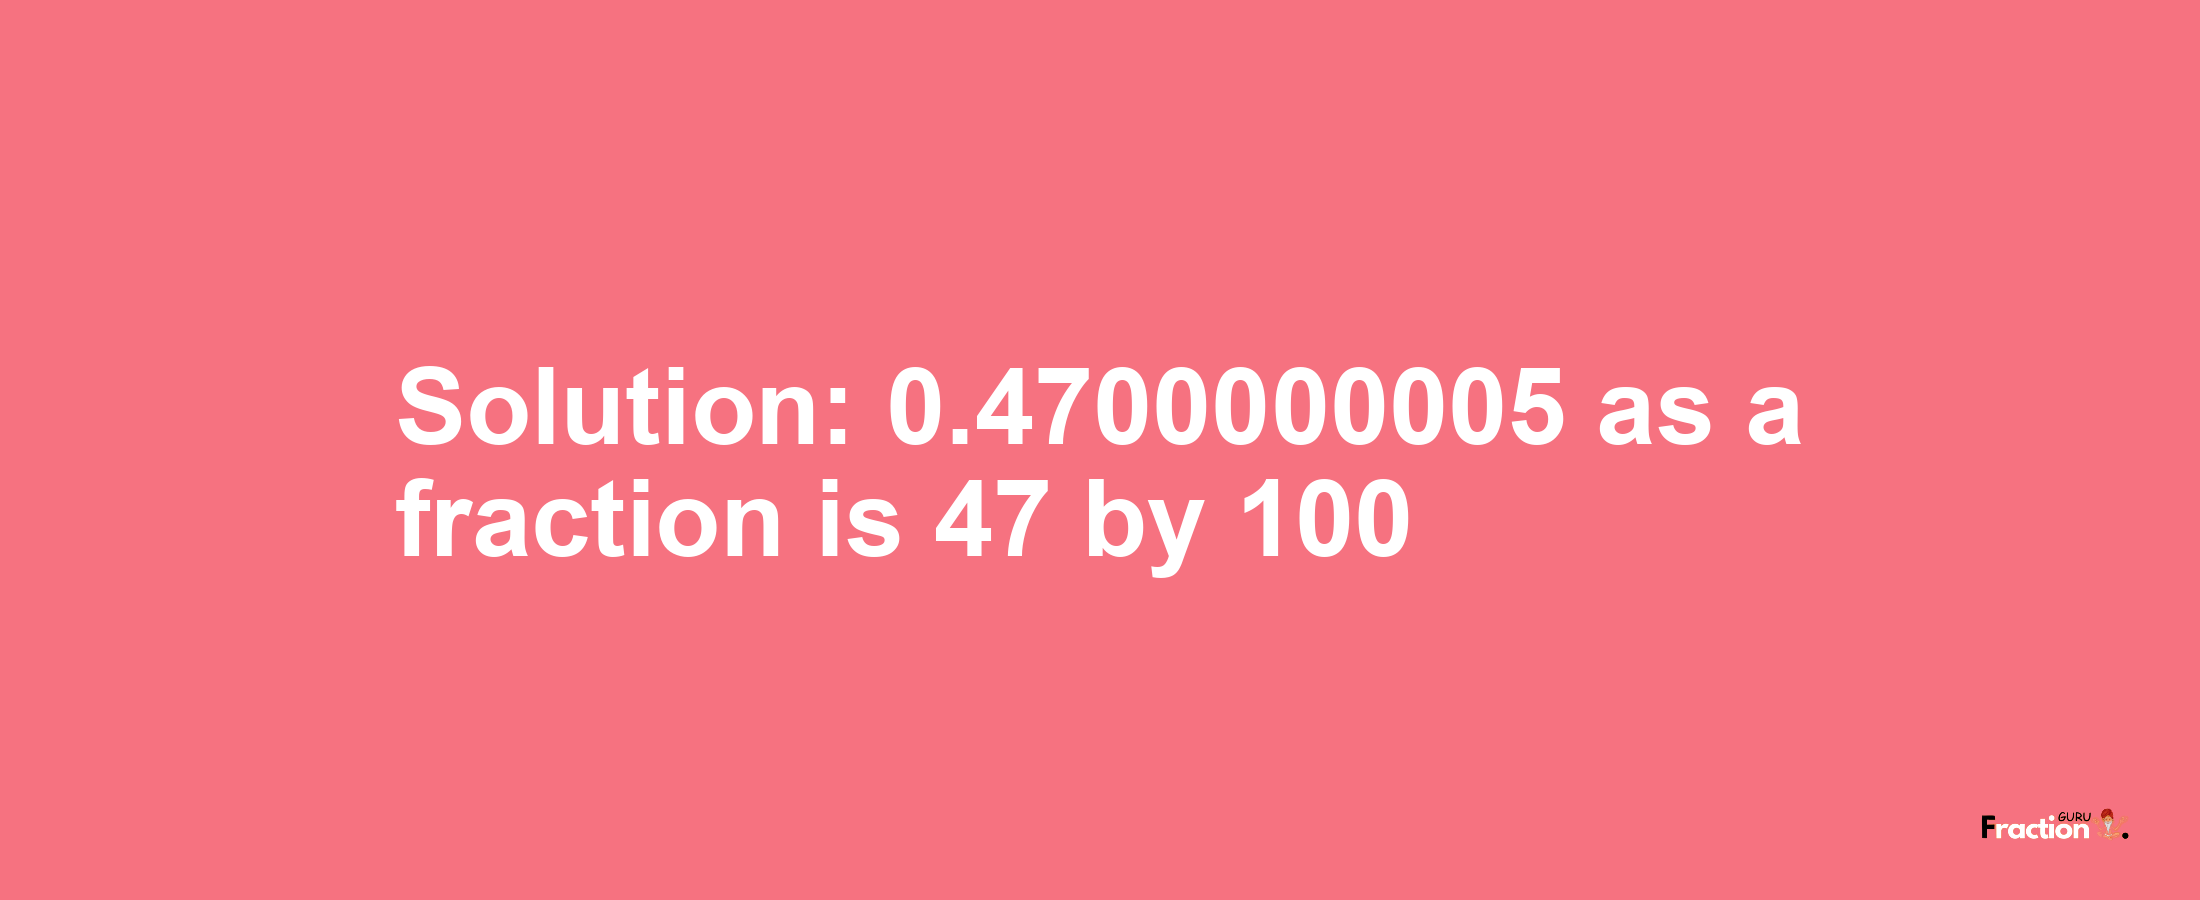 Solution:0.4700000005 as a fraction is 47/100